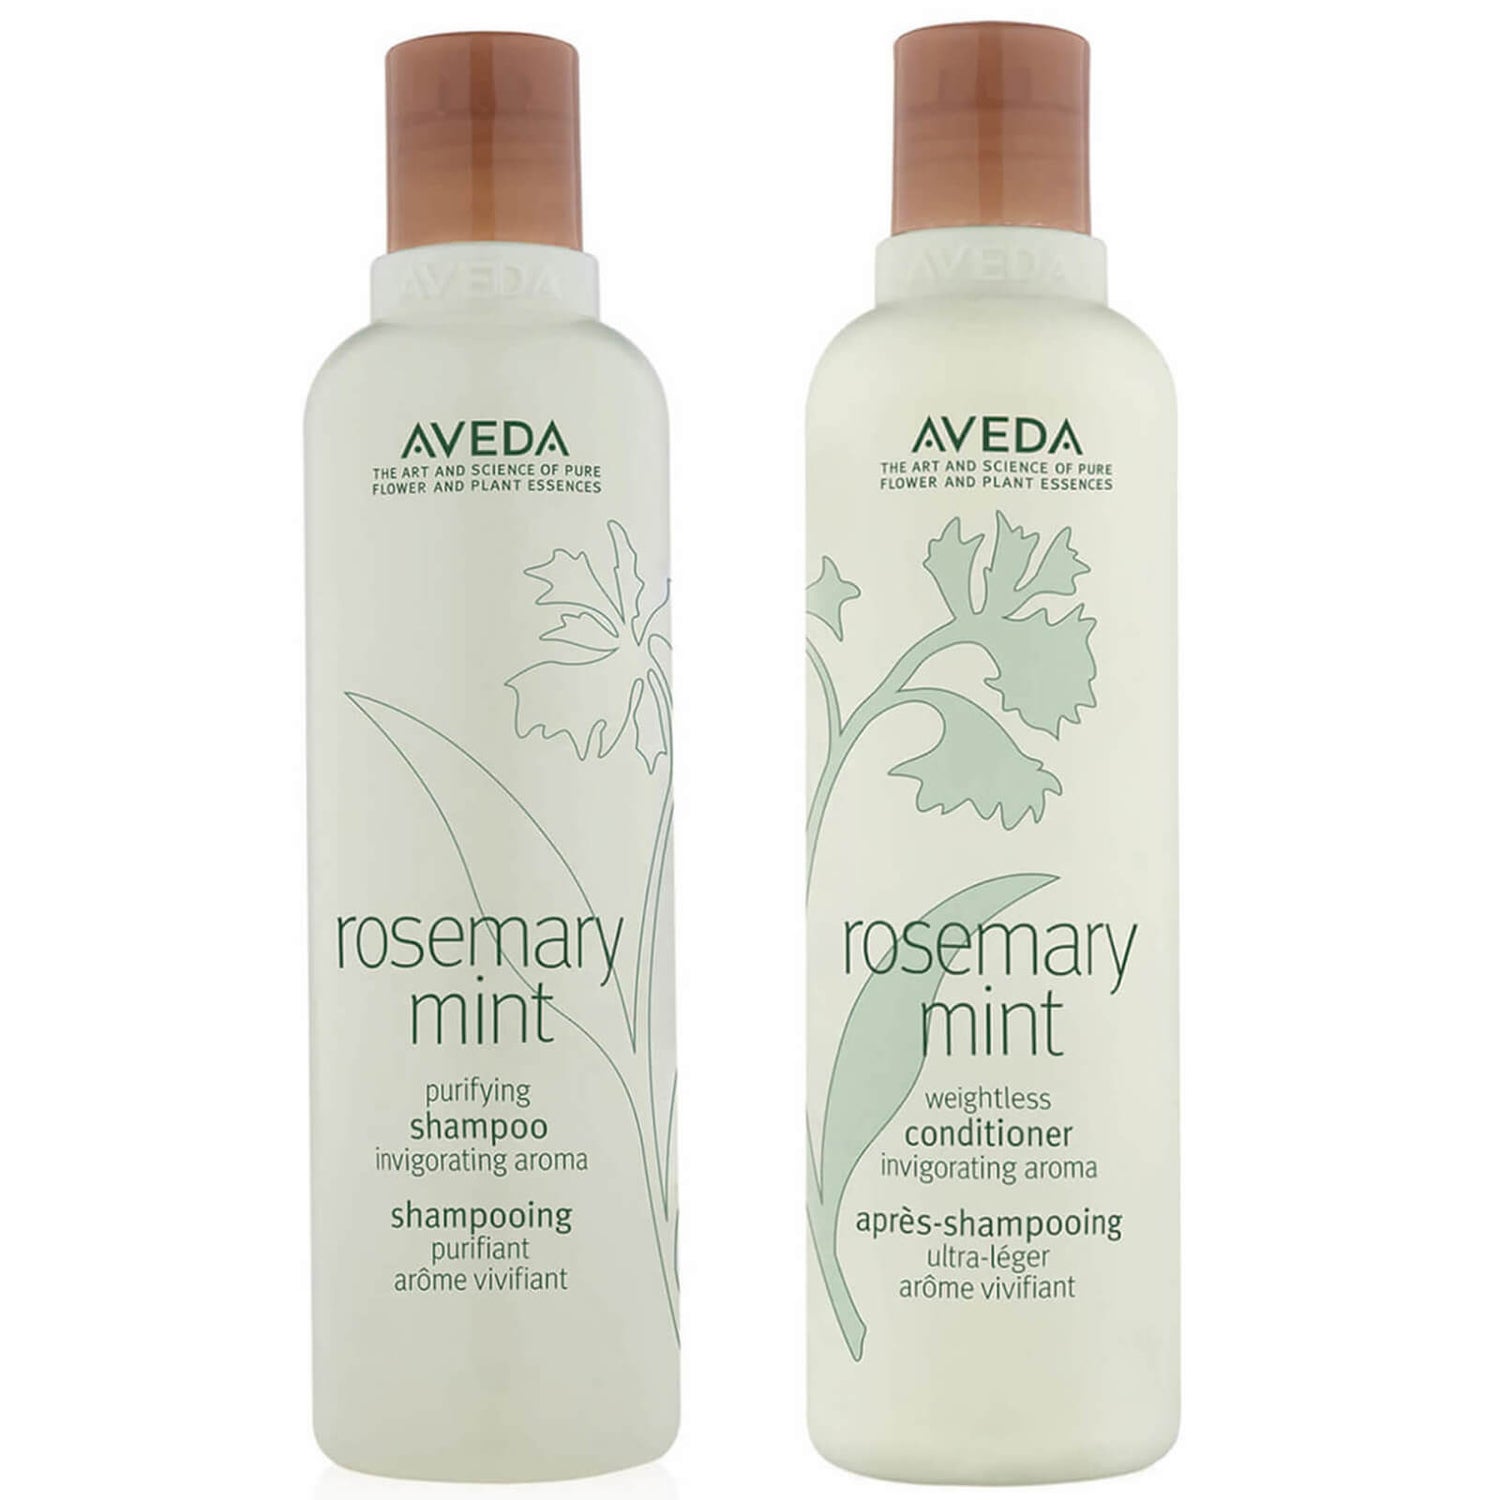 Shampoing et après-shampoing Aveda Rosemary Mint Duo